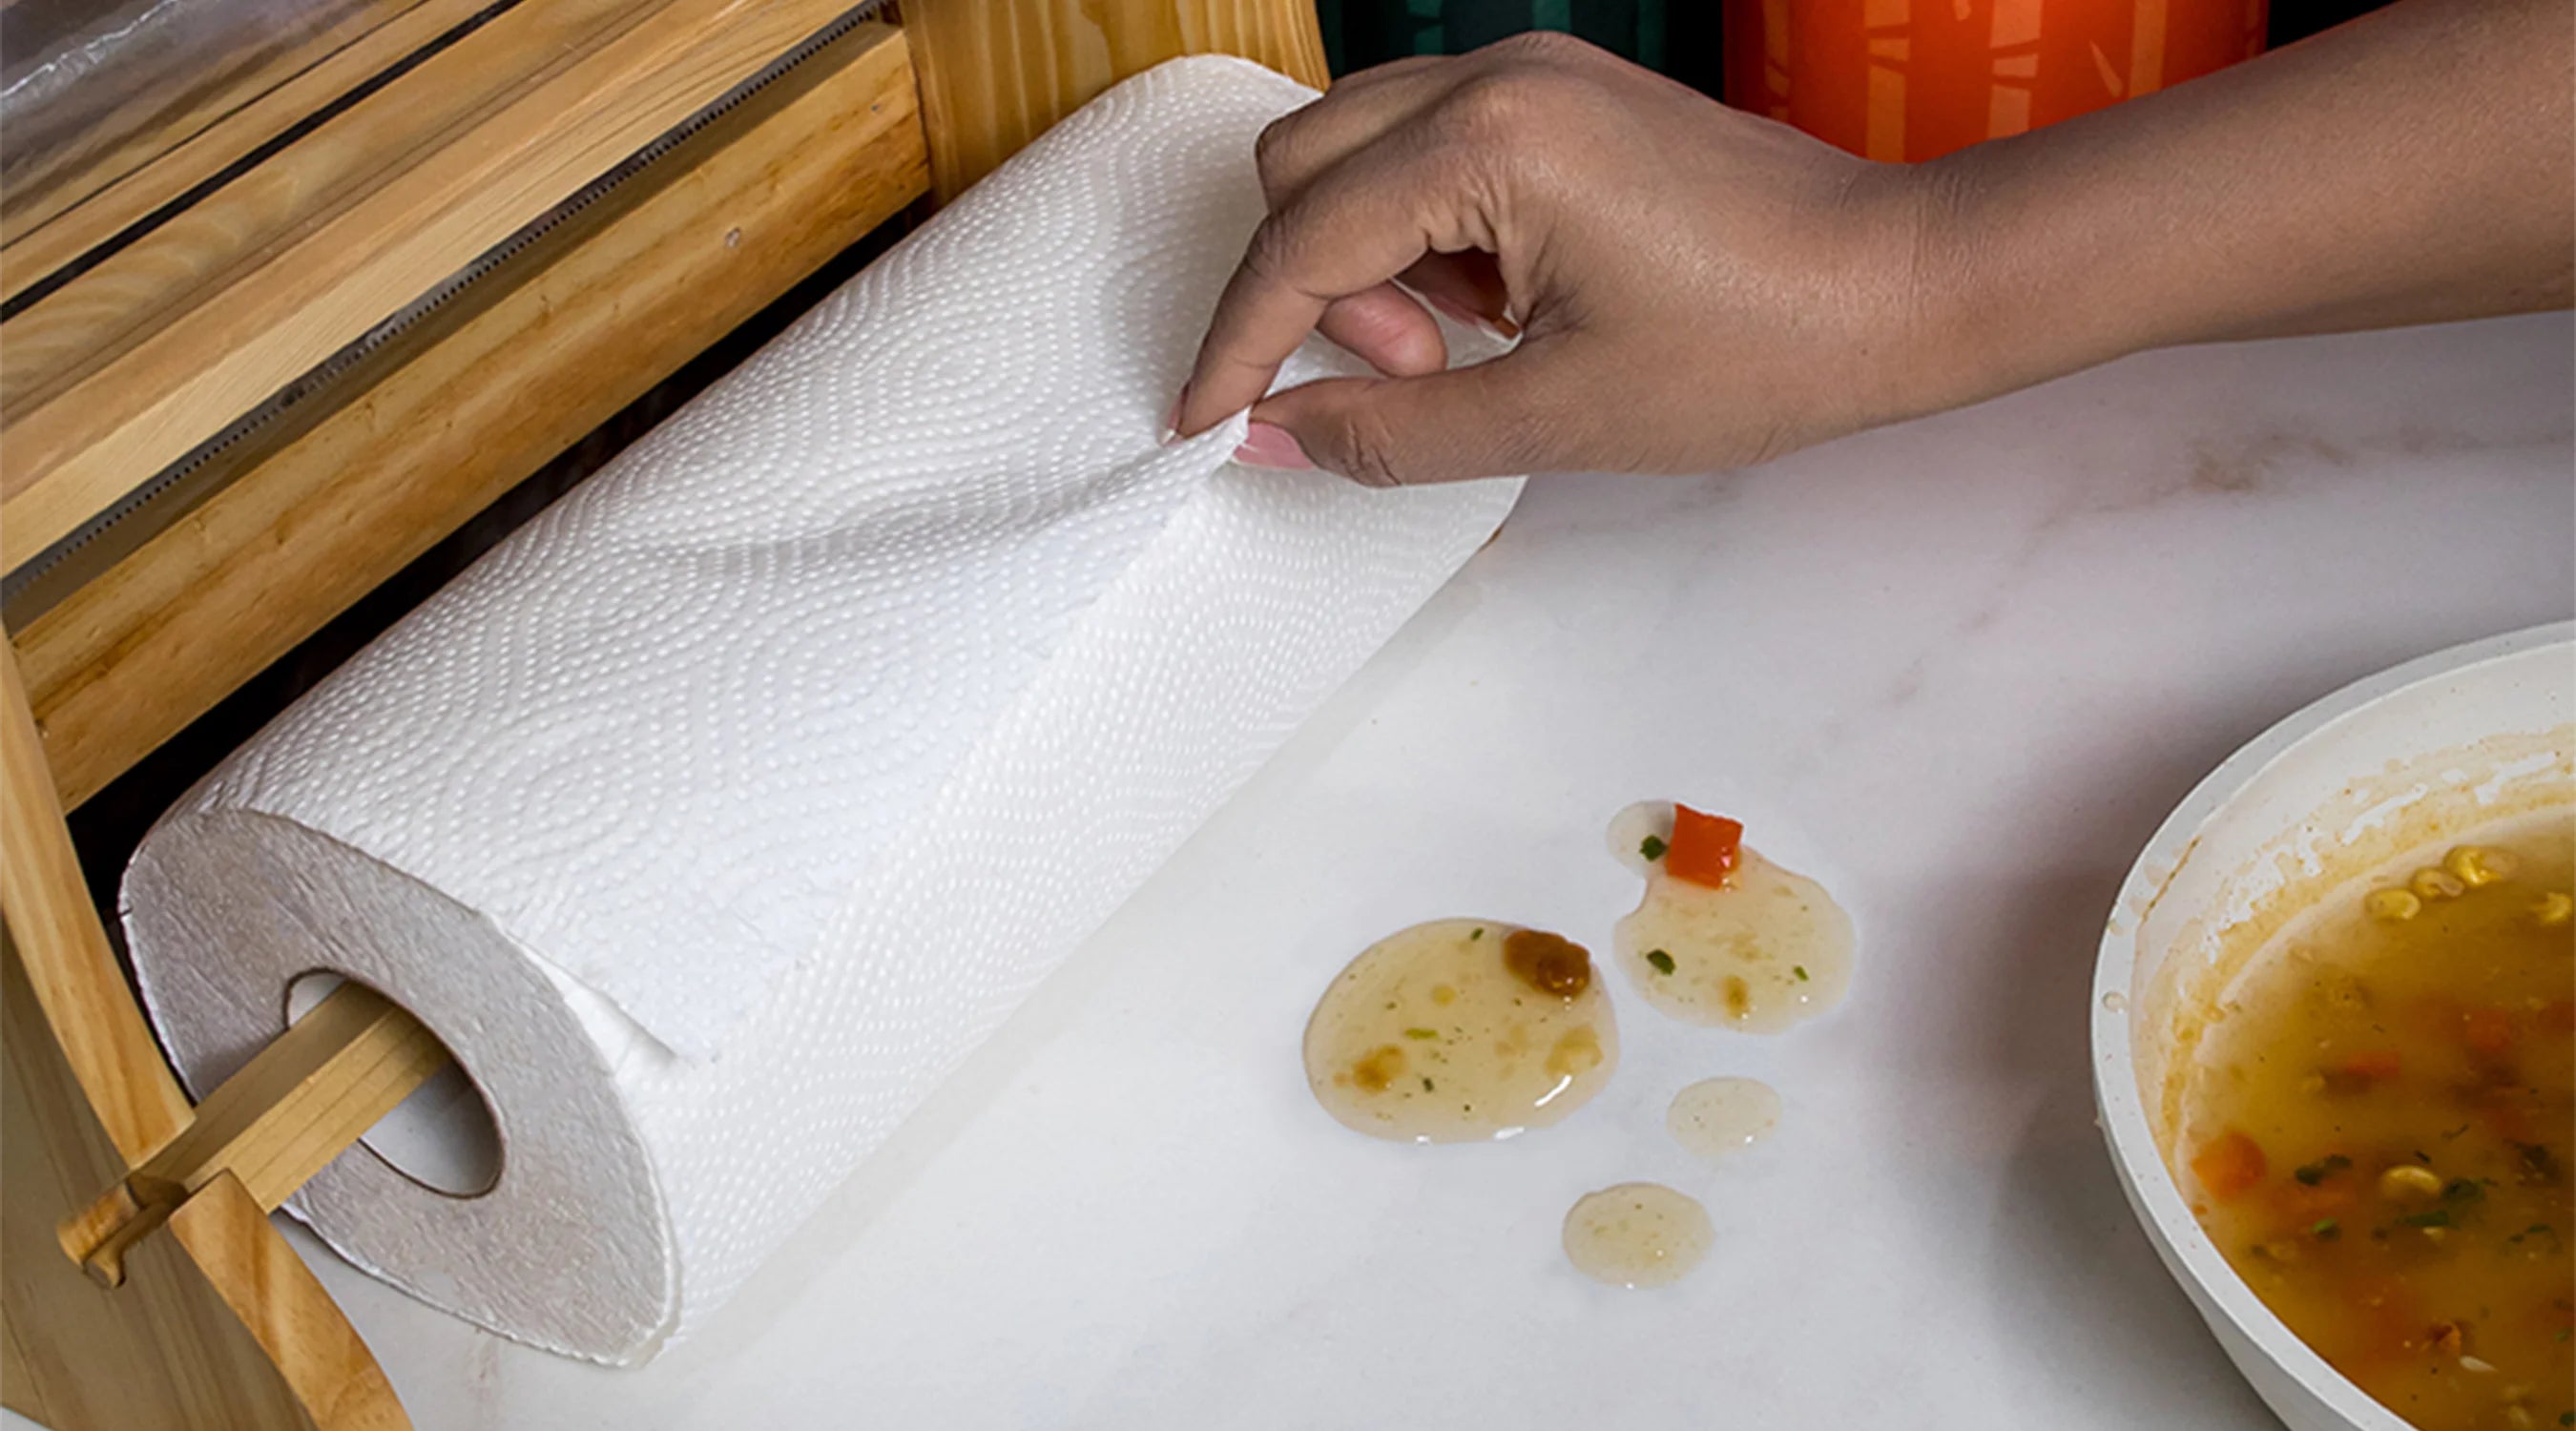 A person placing a Bamboo Cleaning wipe on a counter to clean and sanitize the surface.